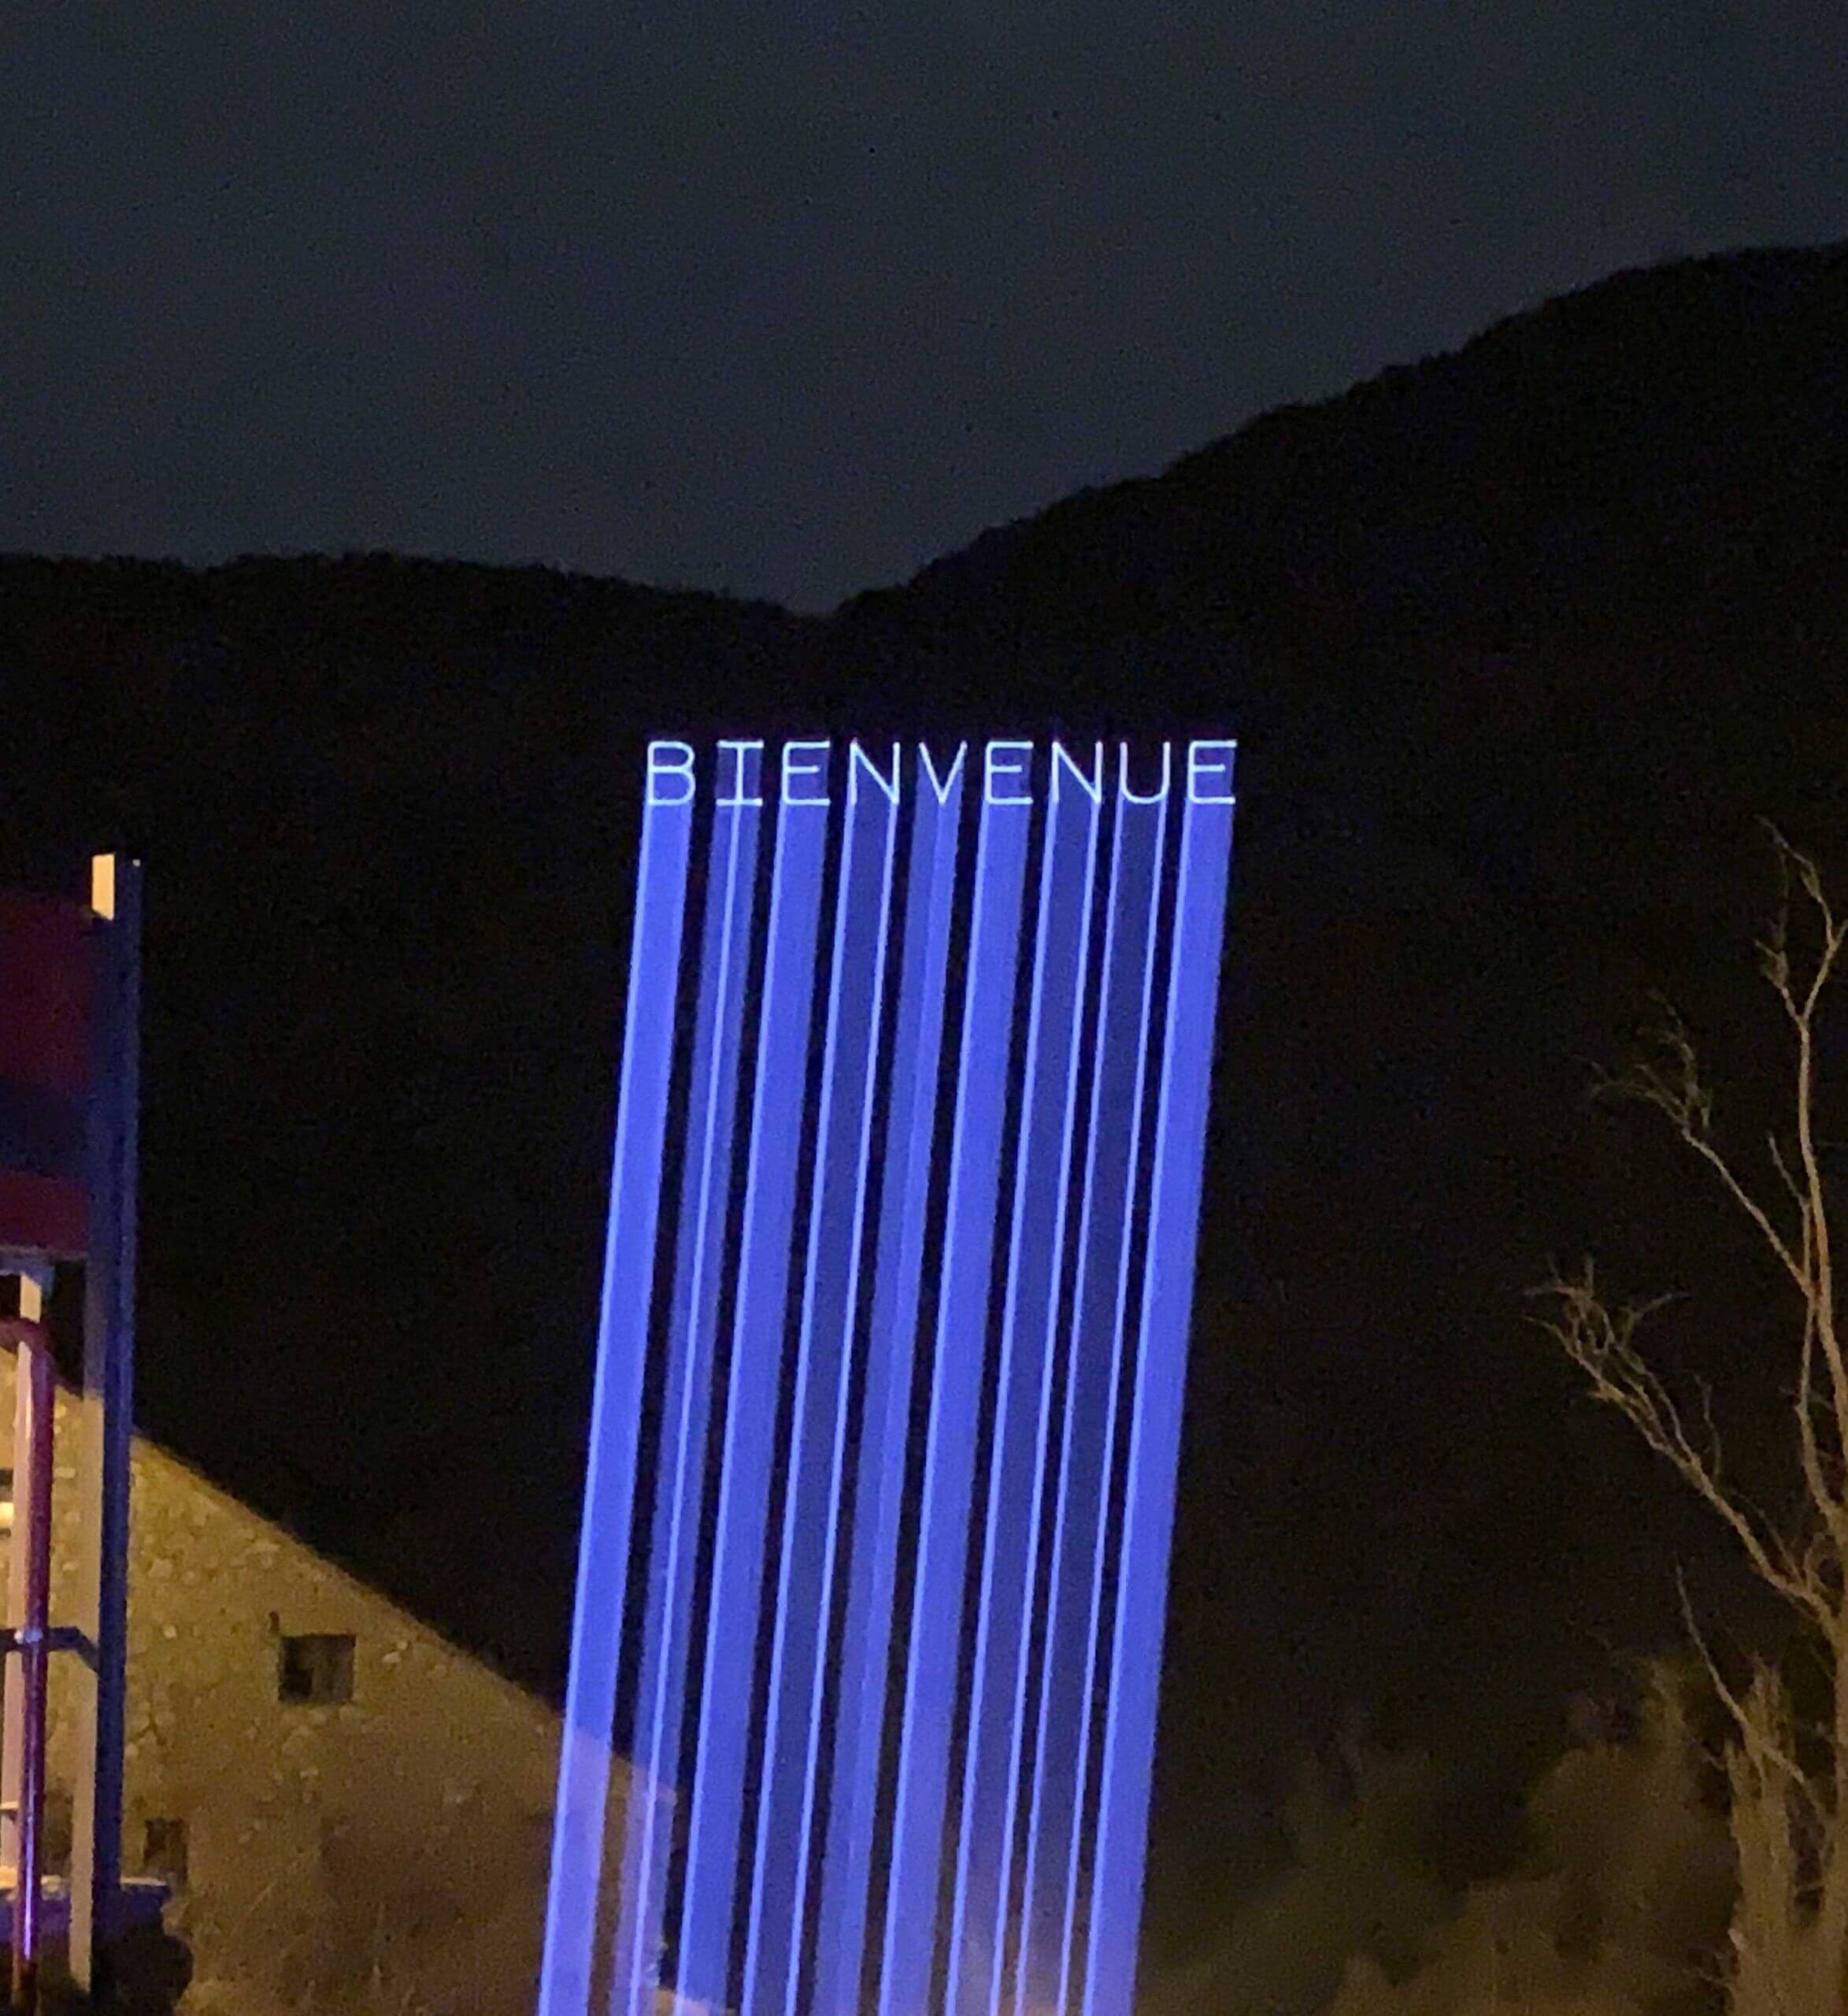 Europe Évènement - Photo of a text projection saying Welcome in blue on a mountain